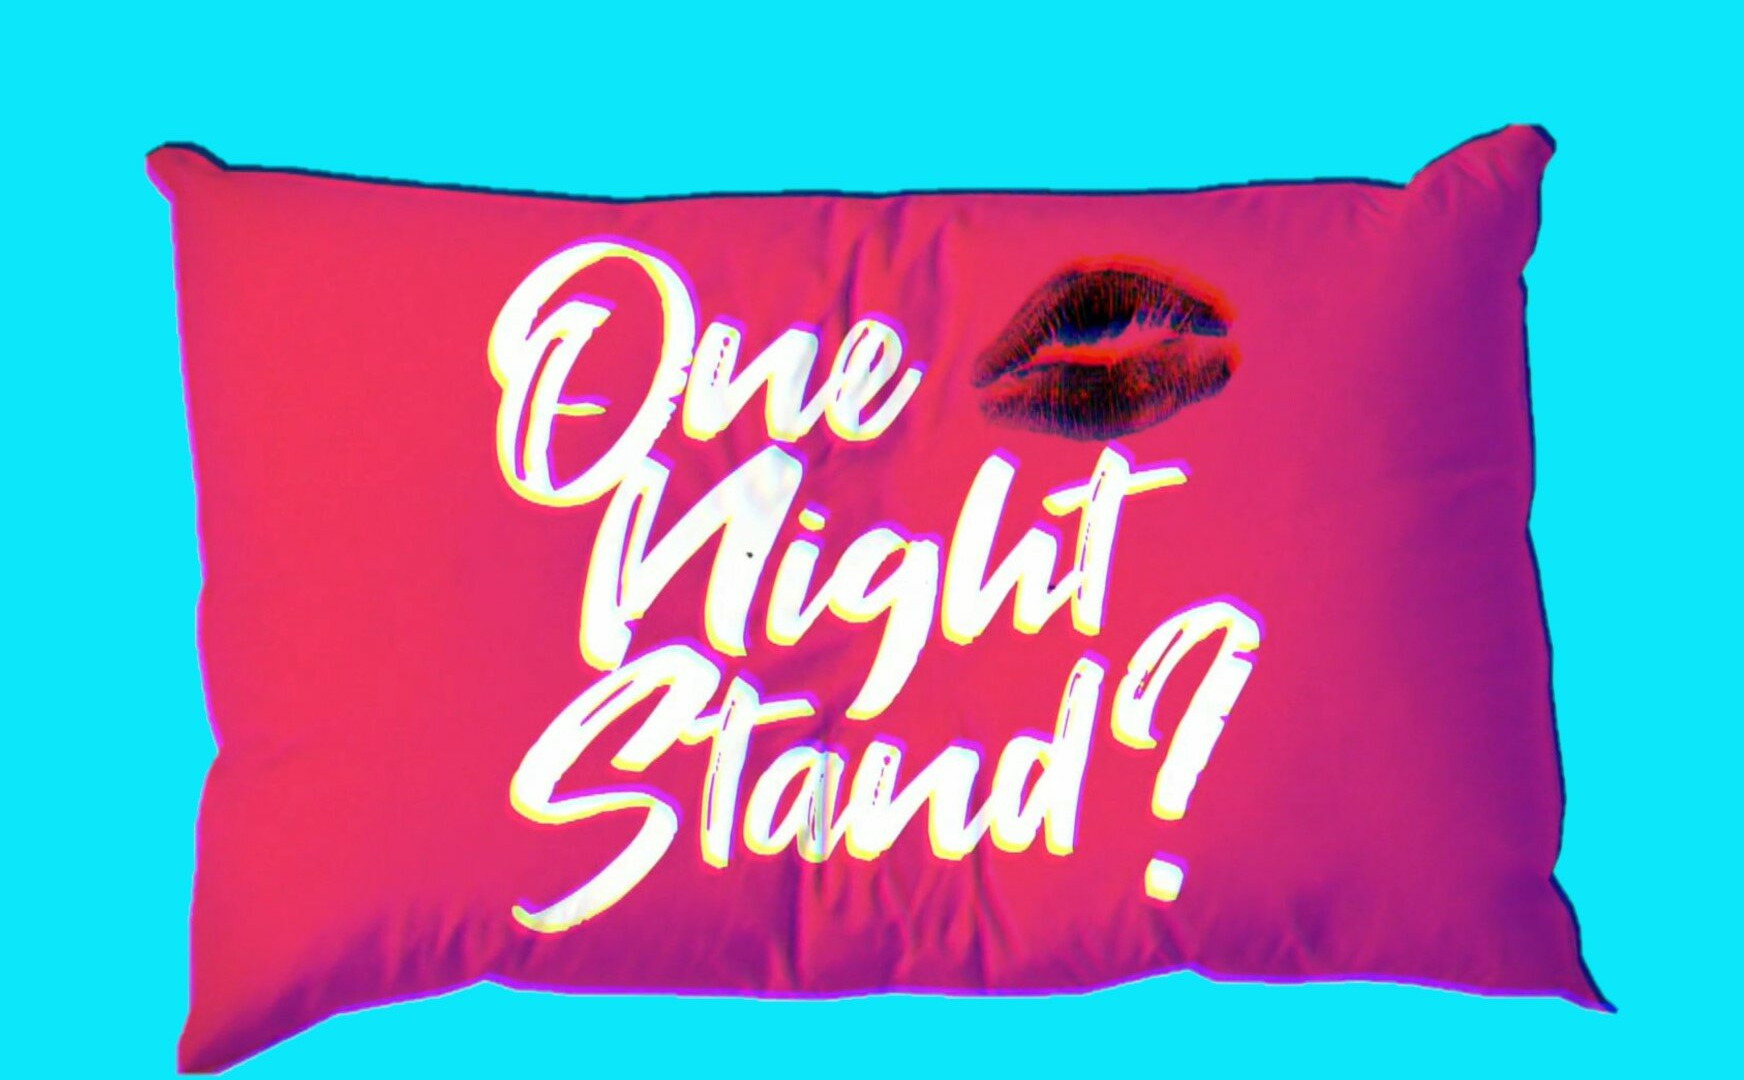 Show One Night Stand